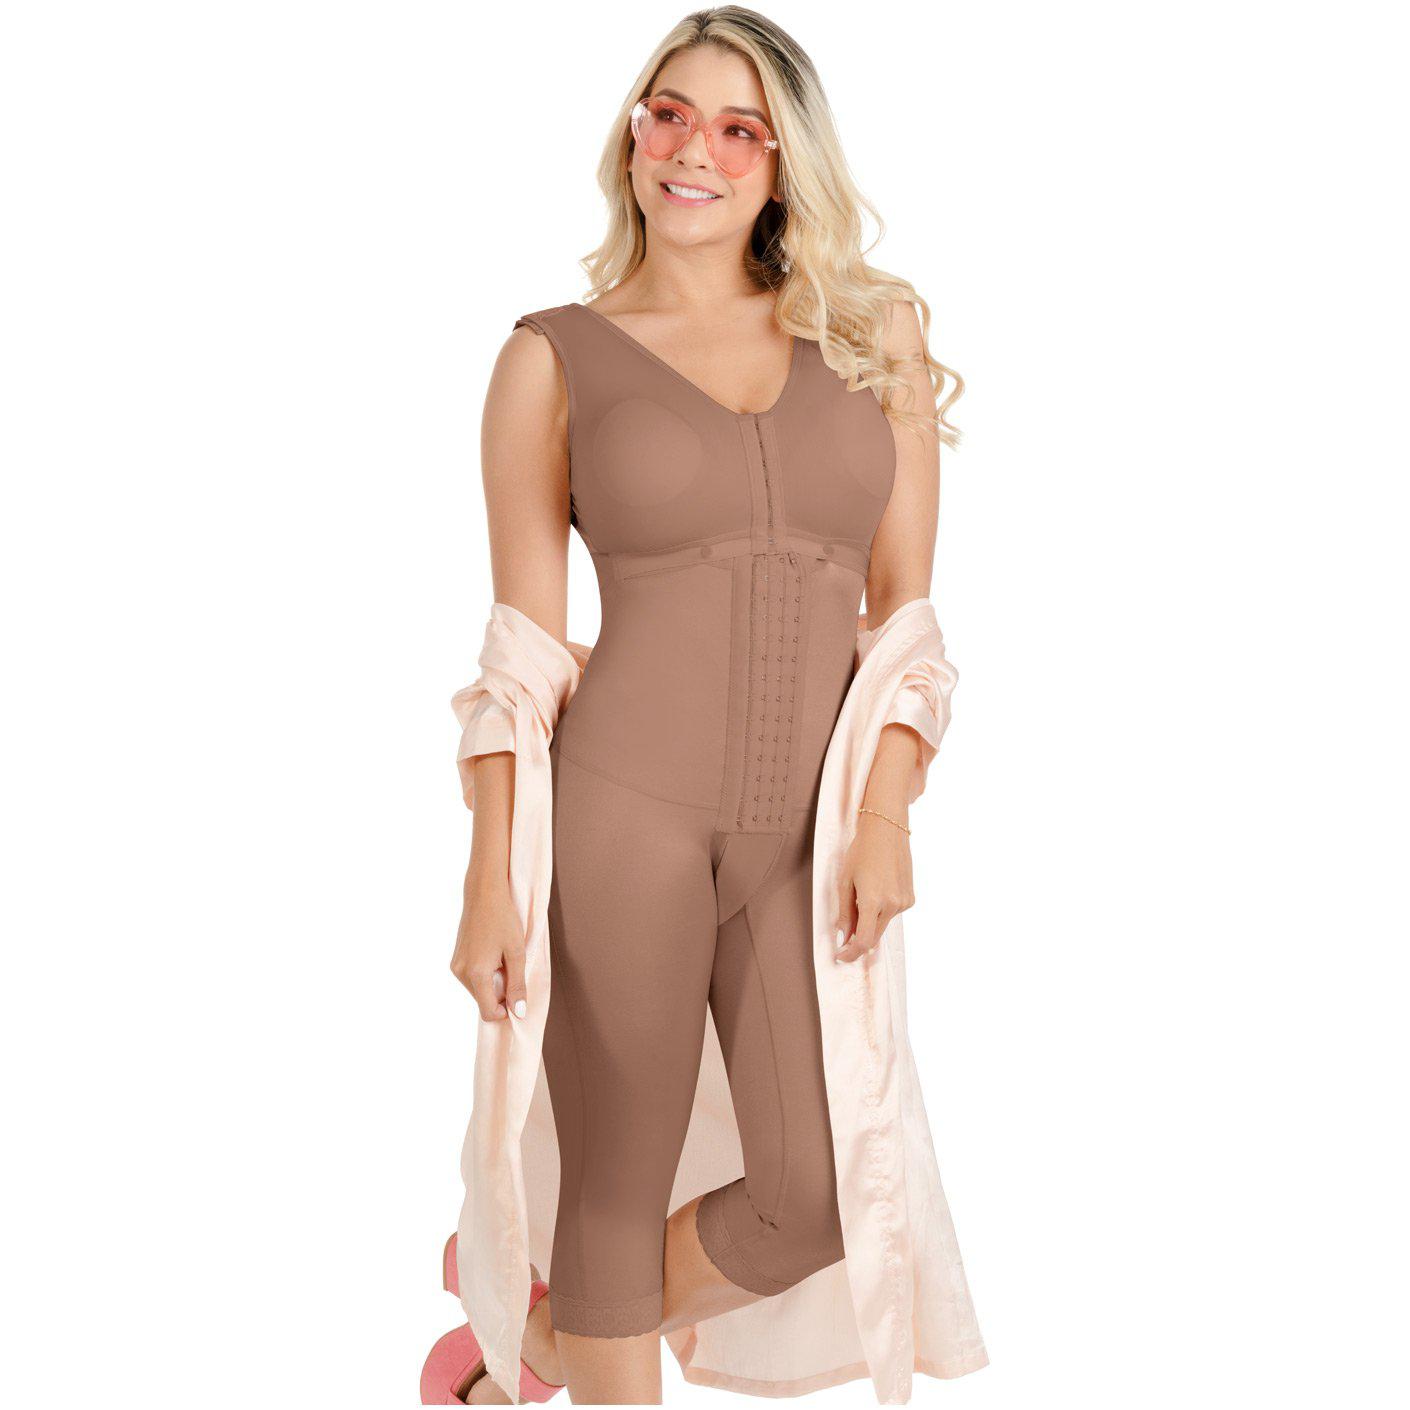 Sonryse 096 Colombian Faja Post Surgery Compression Shapewear Garment After  Liposuction for Women Colombian Postpartum Shapewear Beige XS at   Women's Clothing store